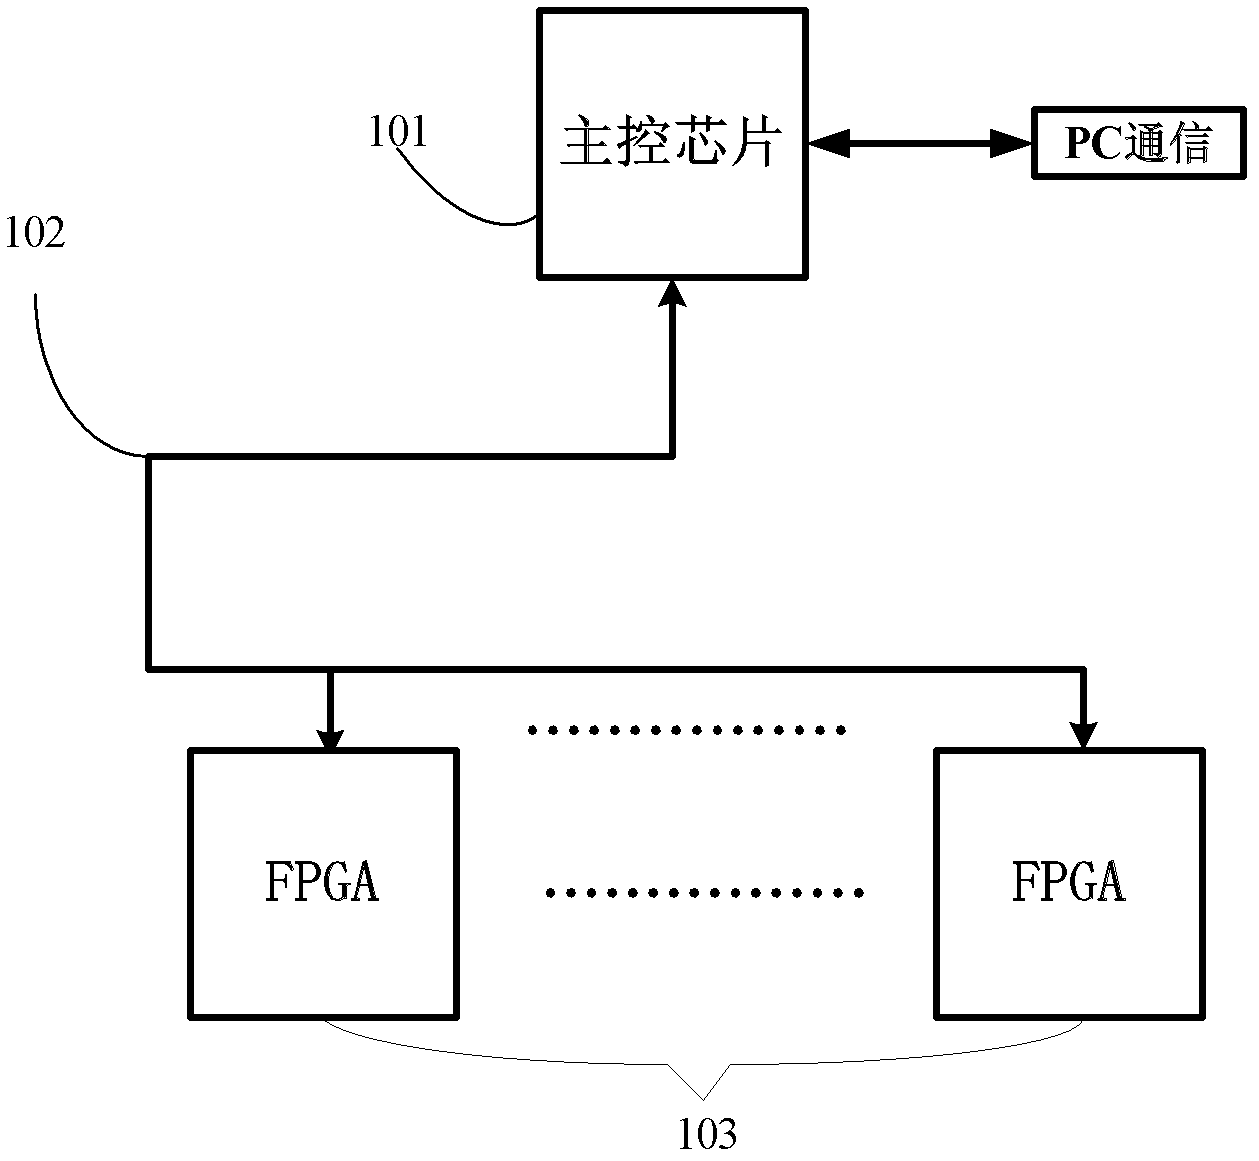 Bus control device for field-programmable gate array (FPGA) prototype verification system